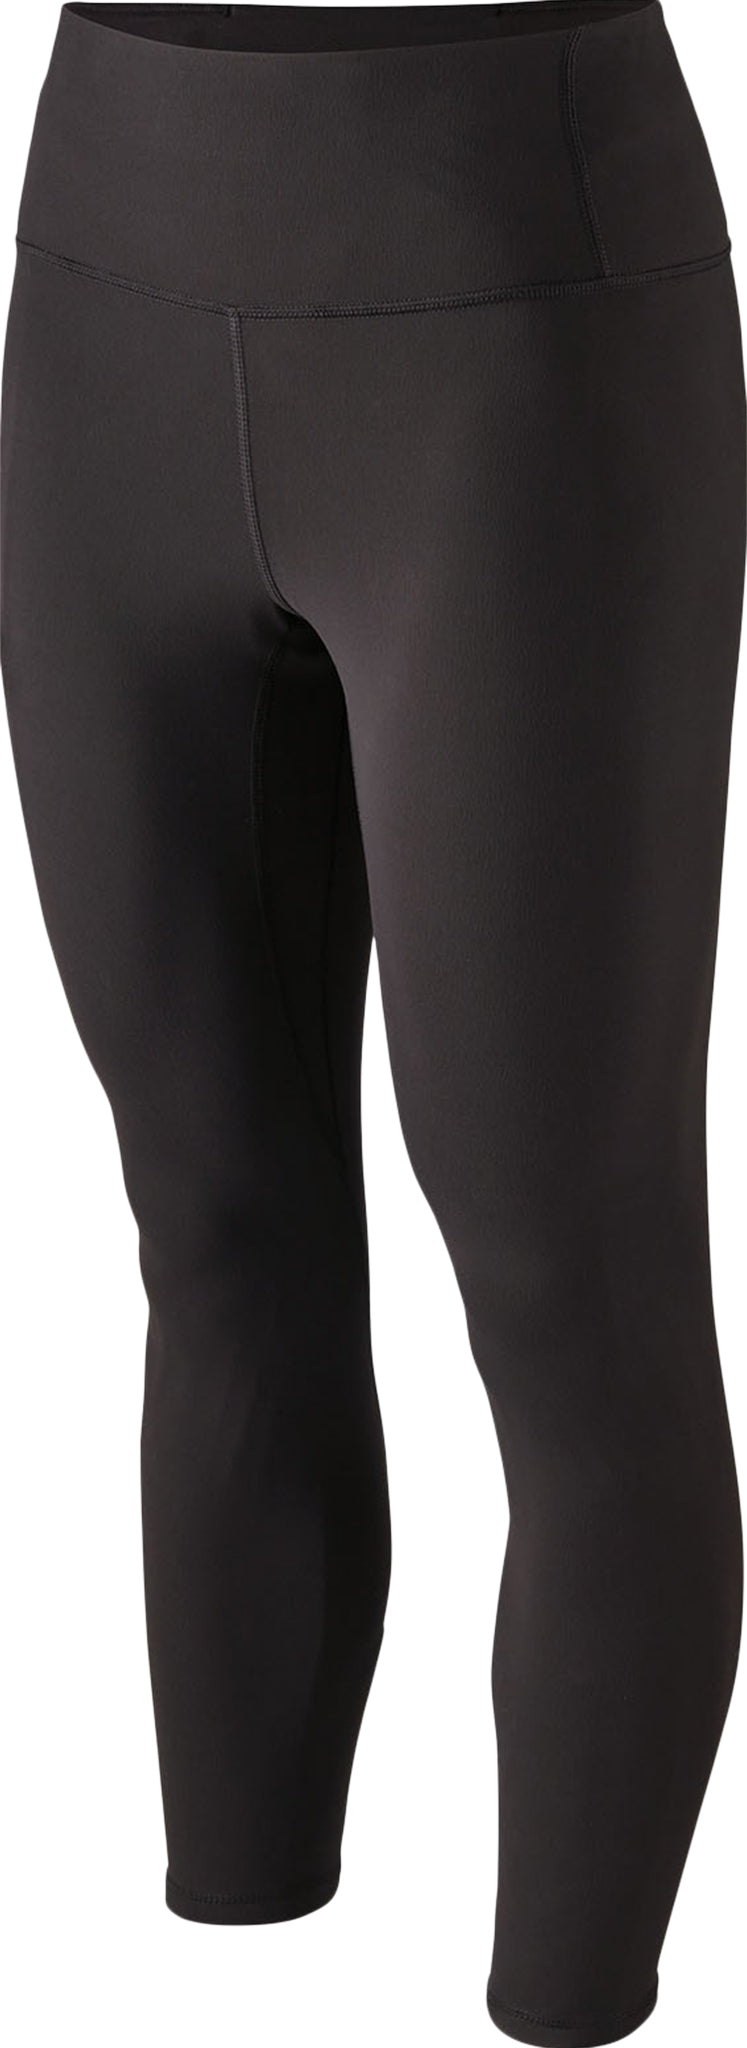 Patagonia Pack Out Tights - Women's